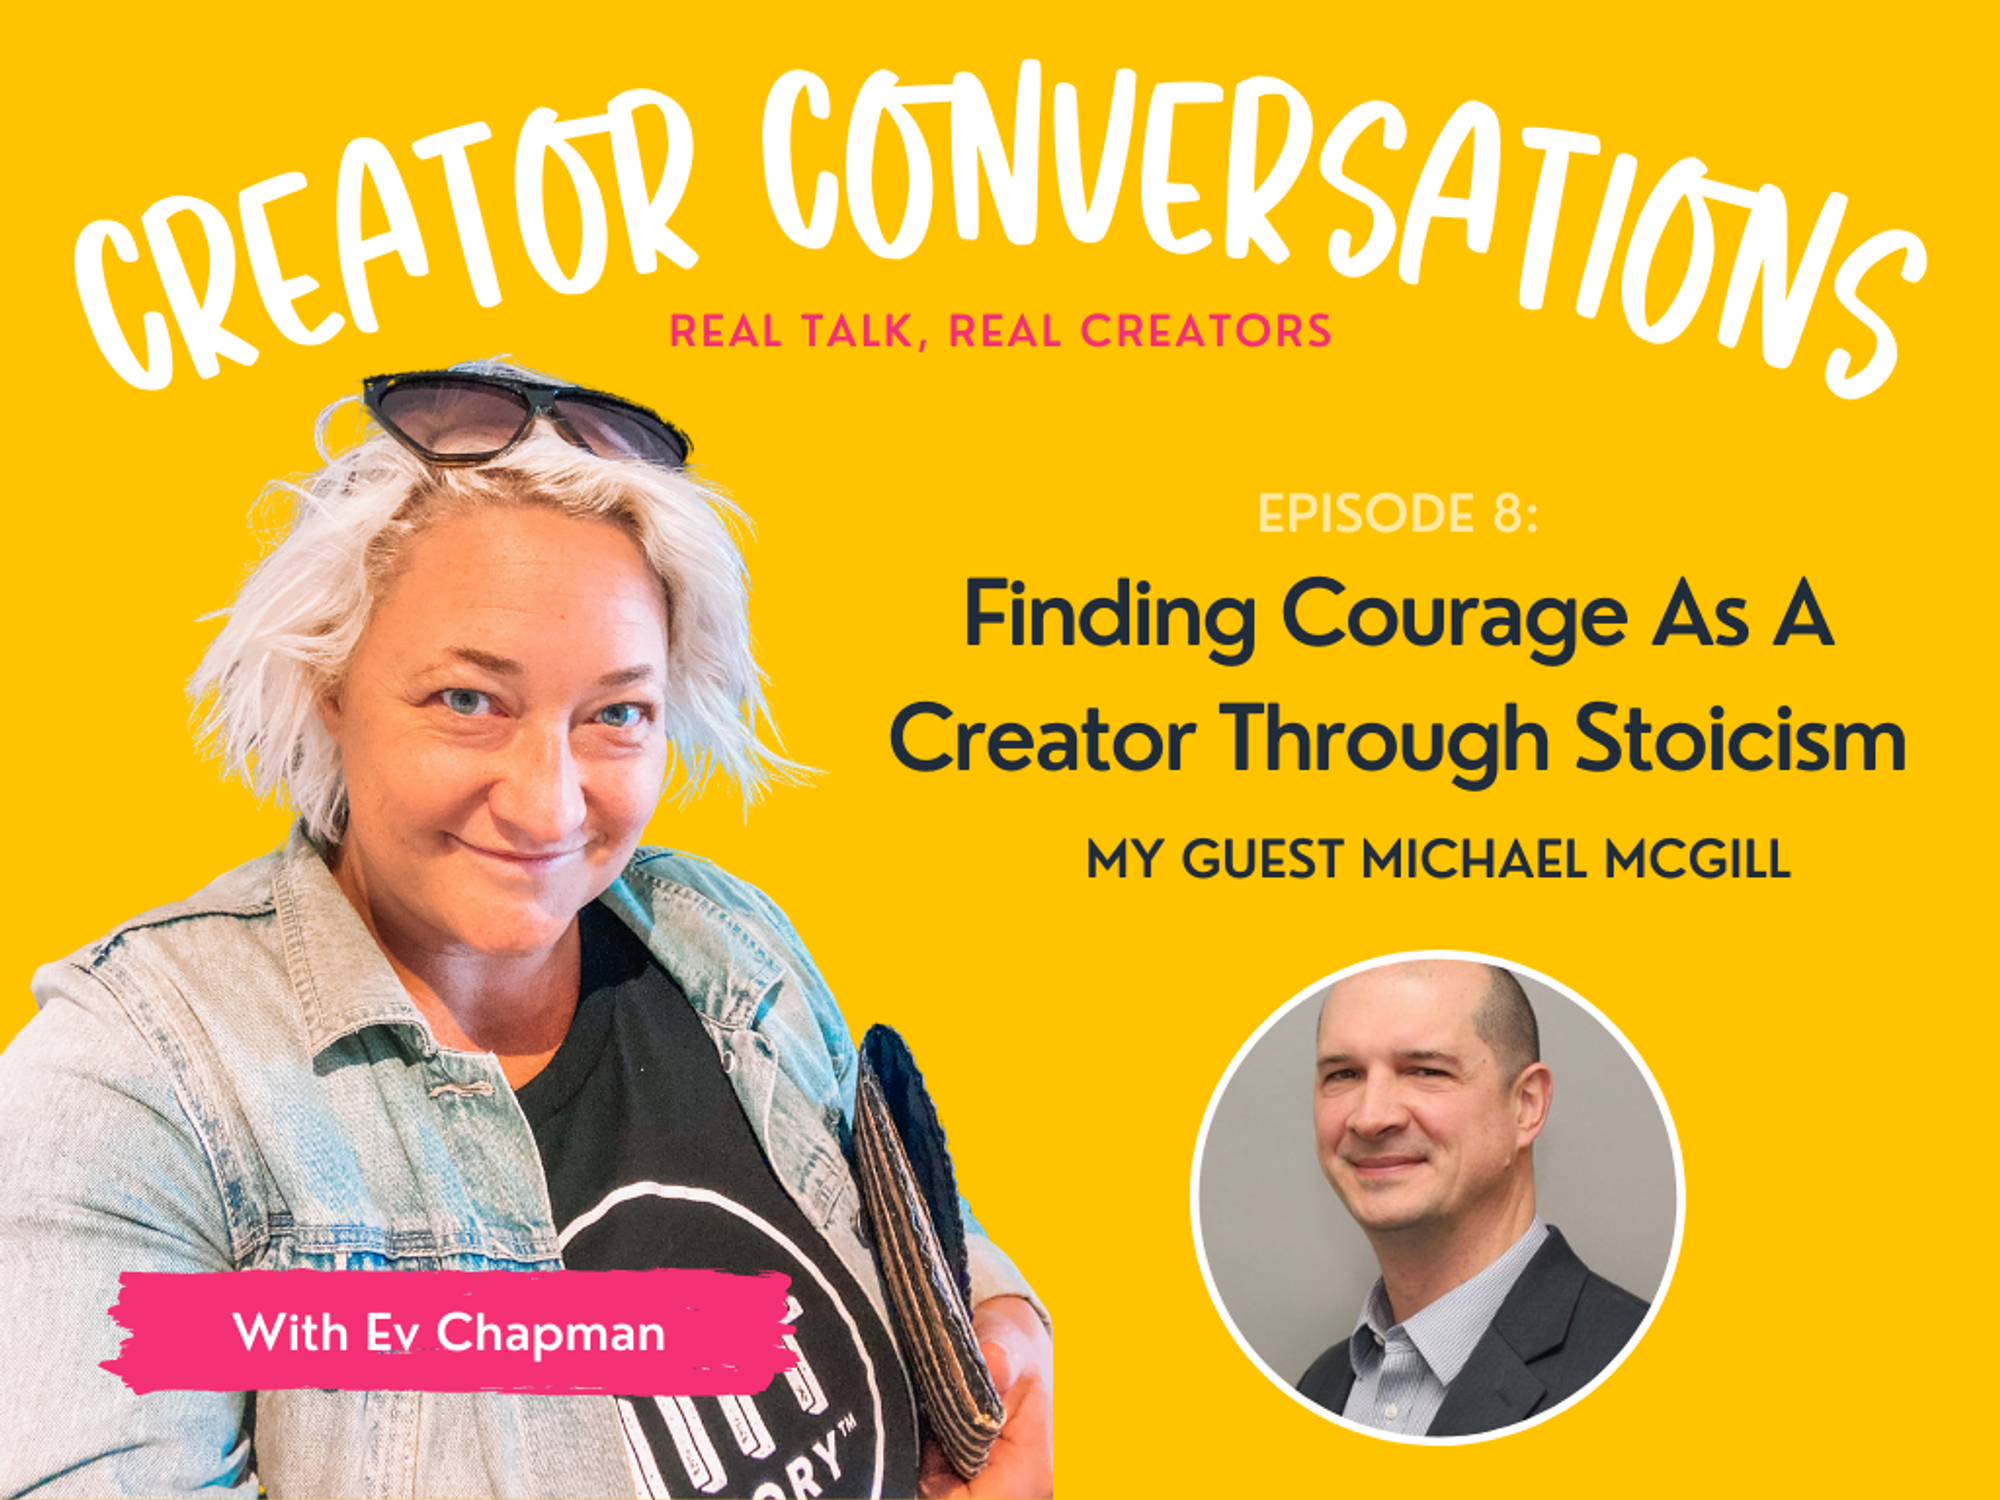 Finding Courage As A Creator Through Stoicism with Michael McGill